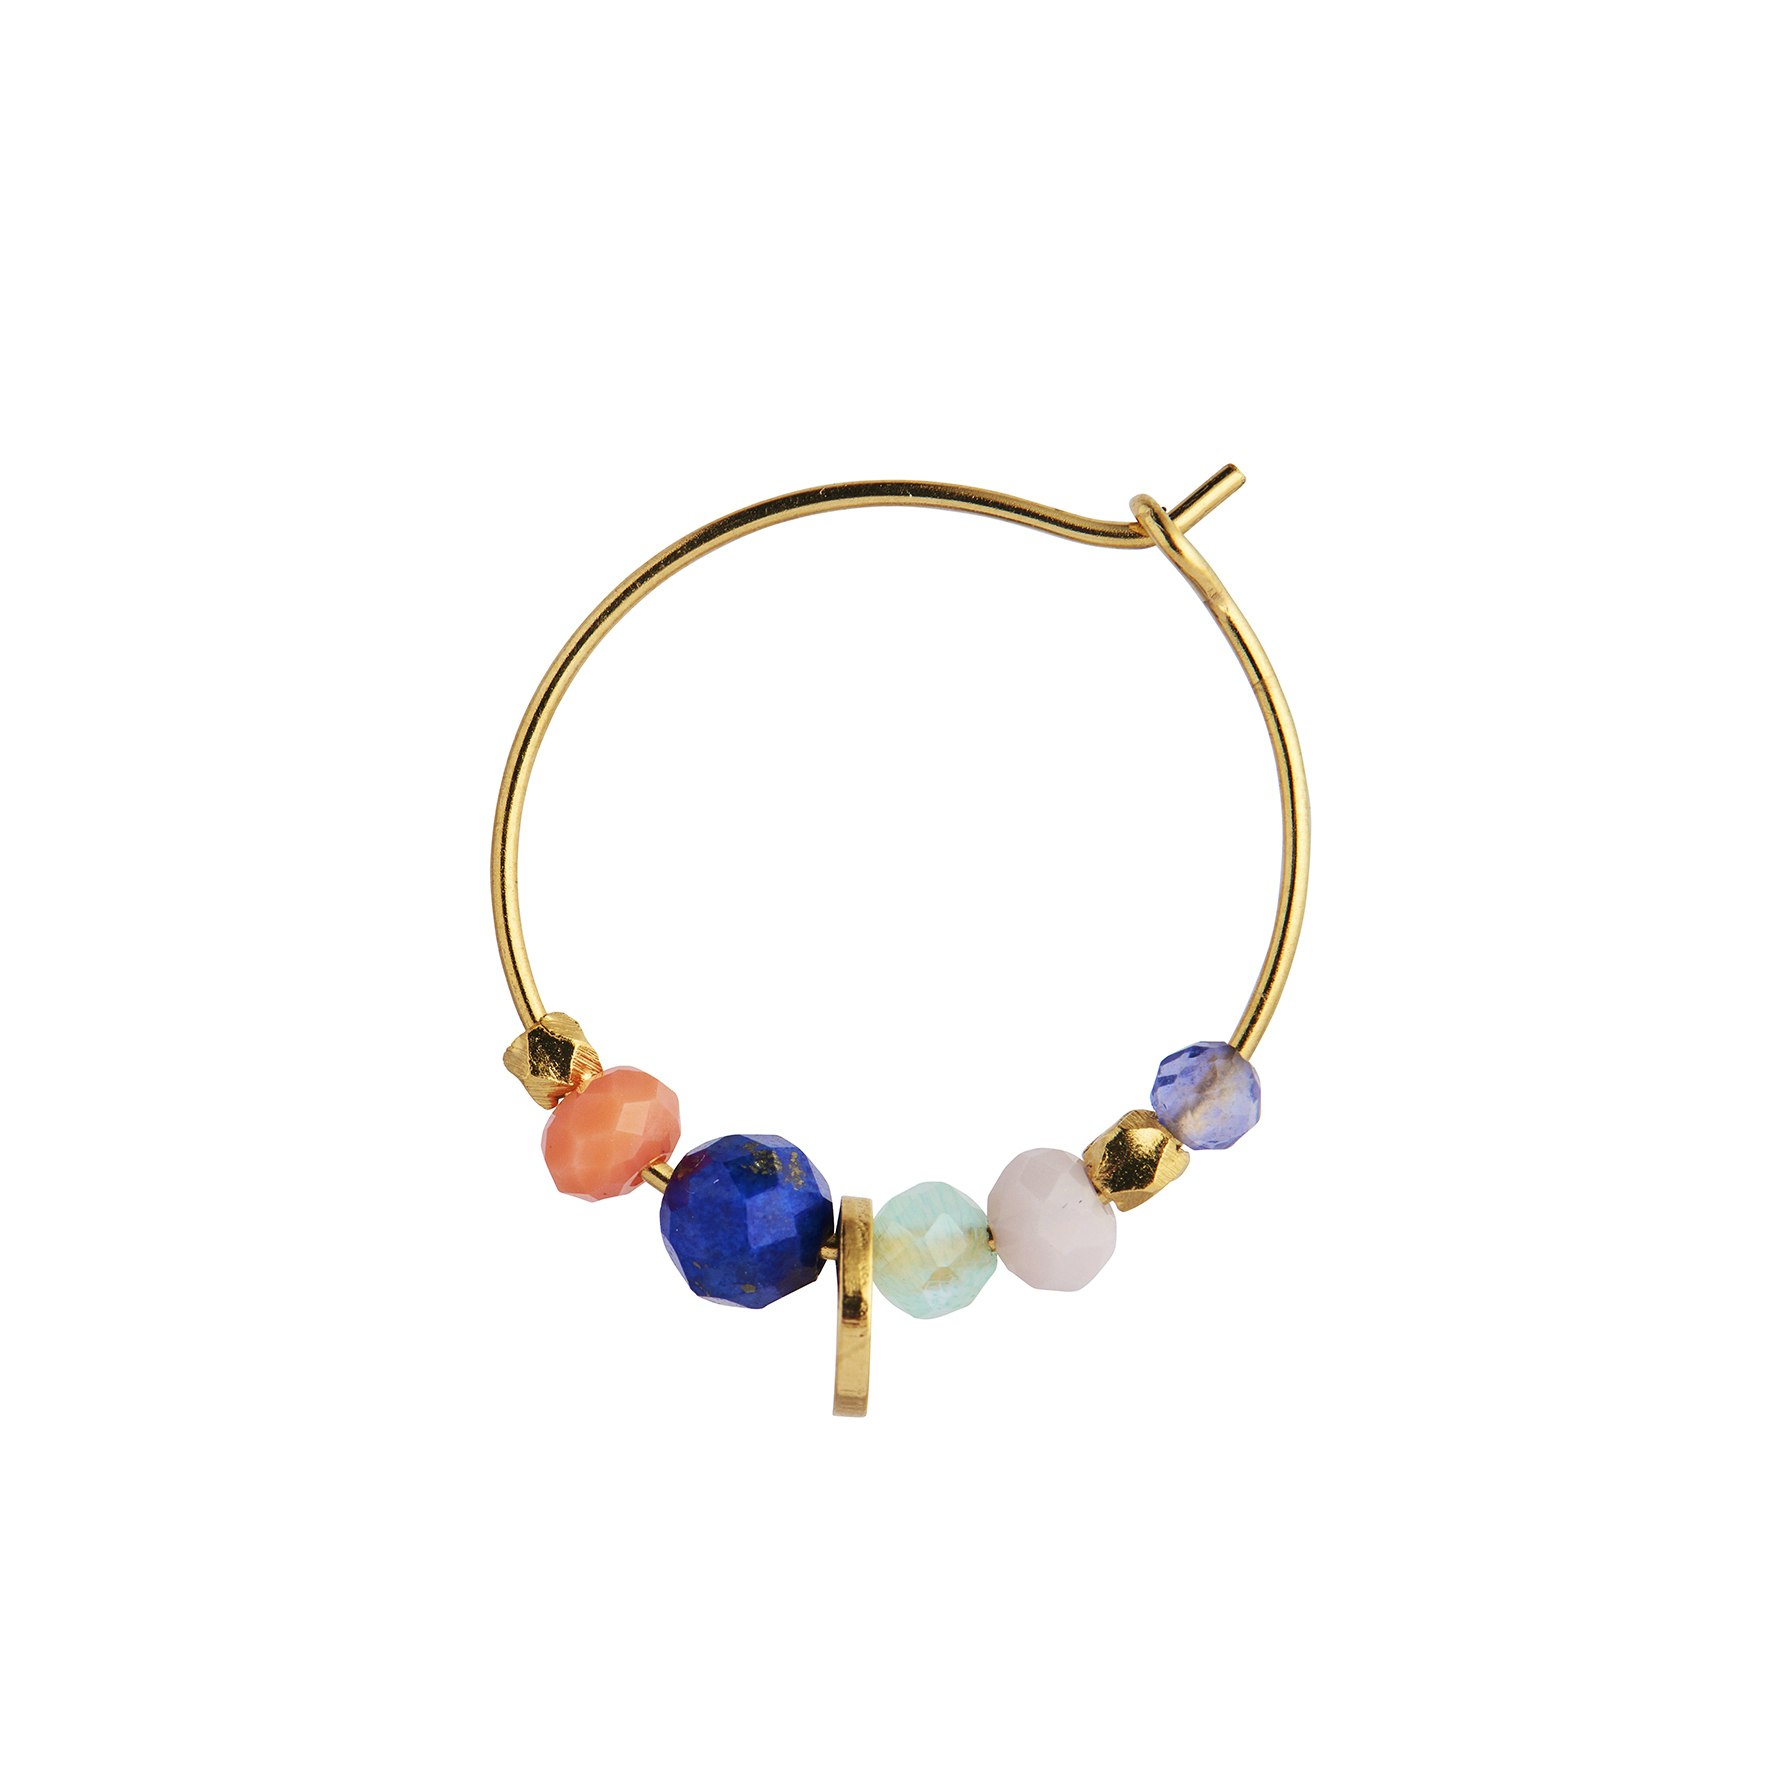 Color Crush Hoop - Tokyo Mix from STINE A Jewelry in Goldplated-Silver Sterling 925